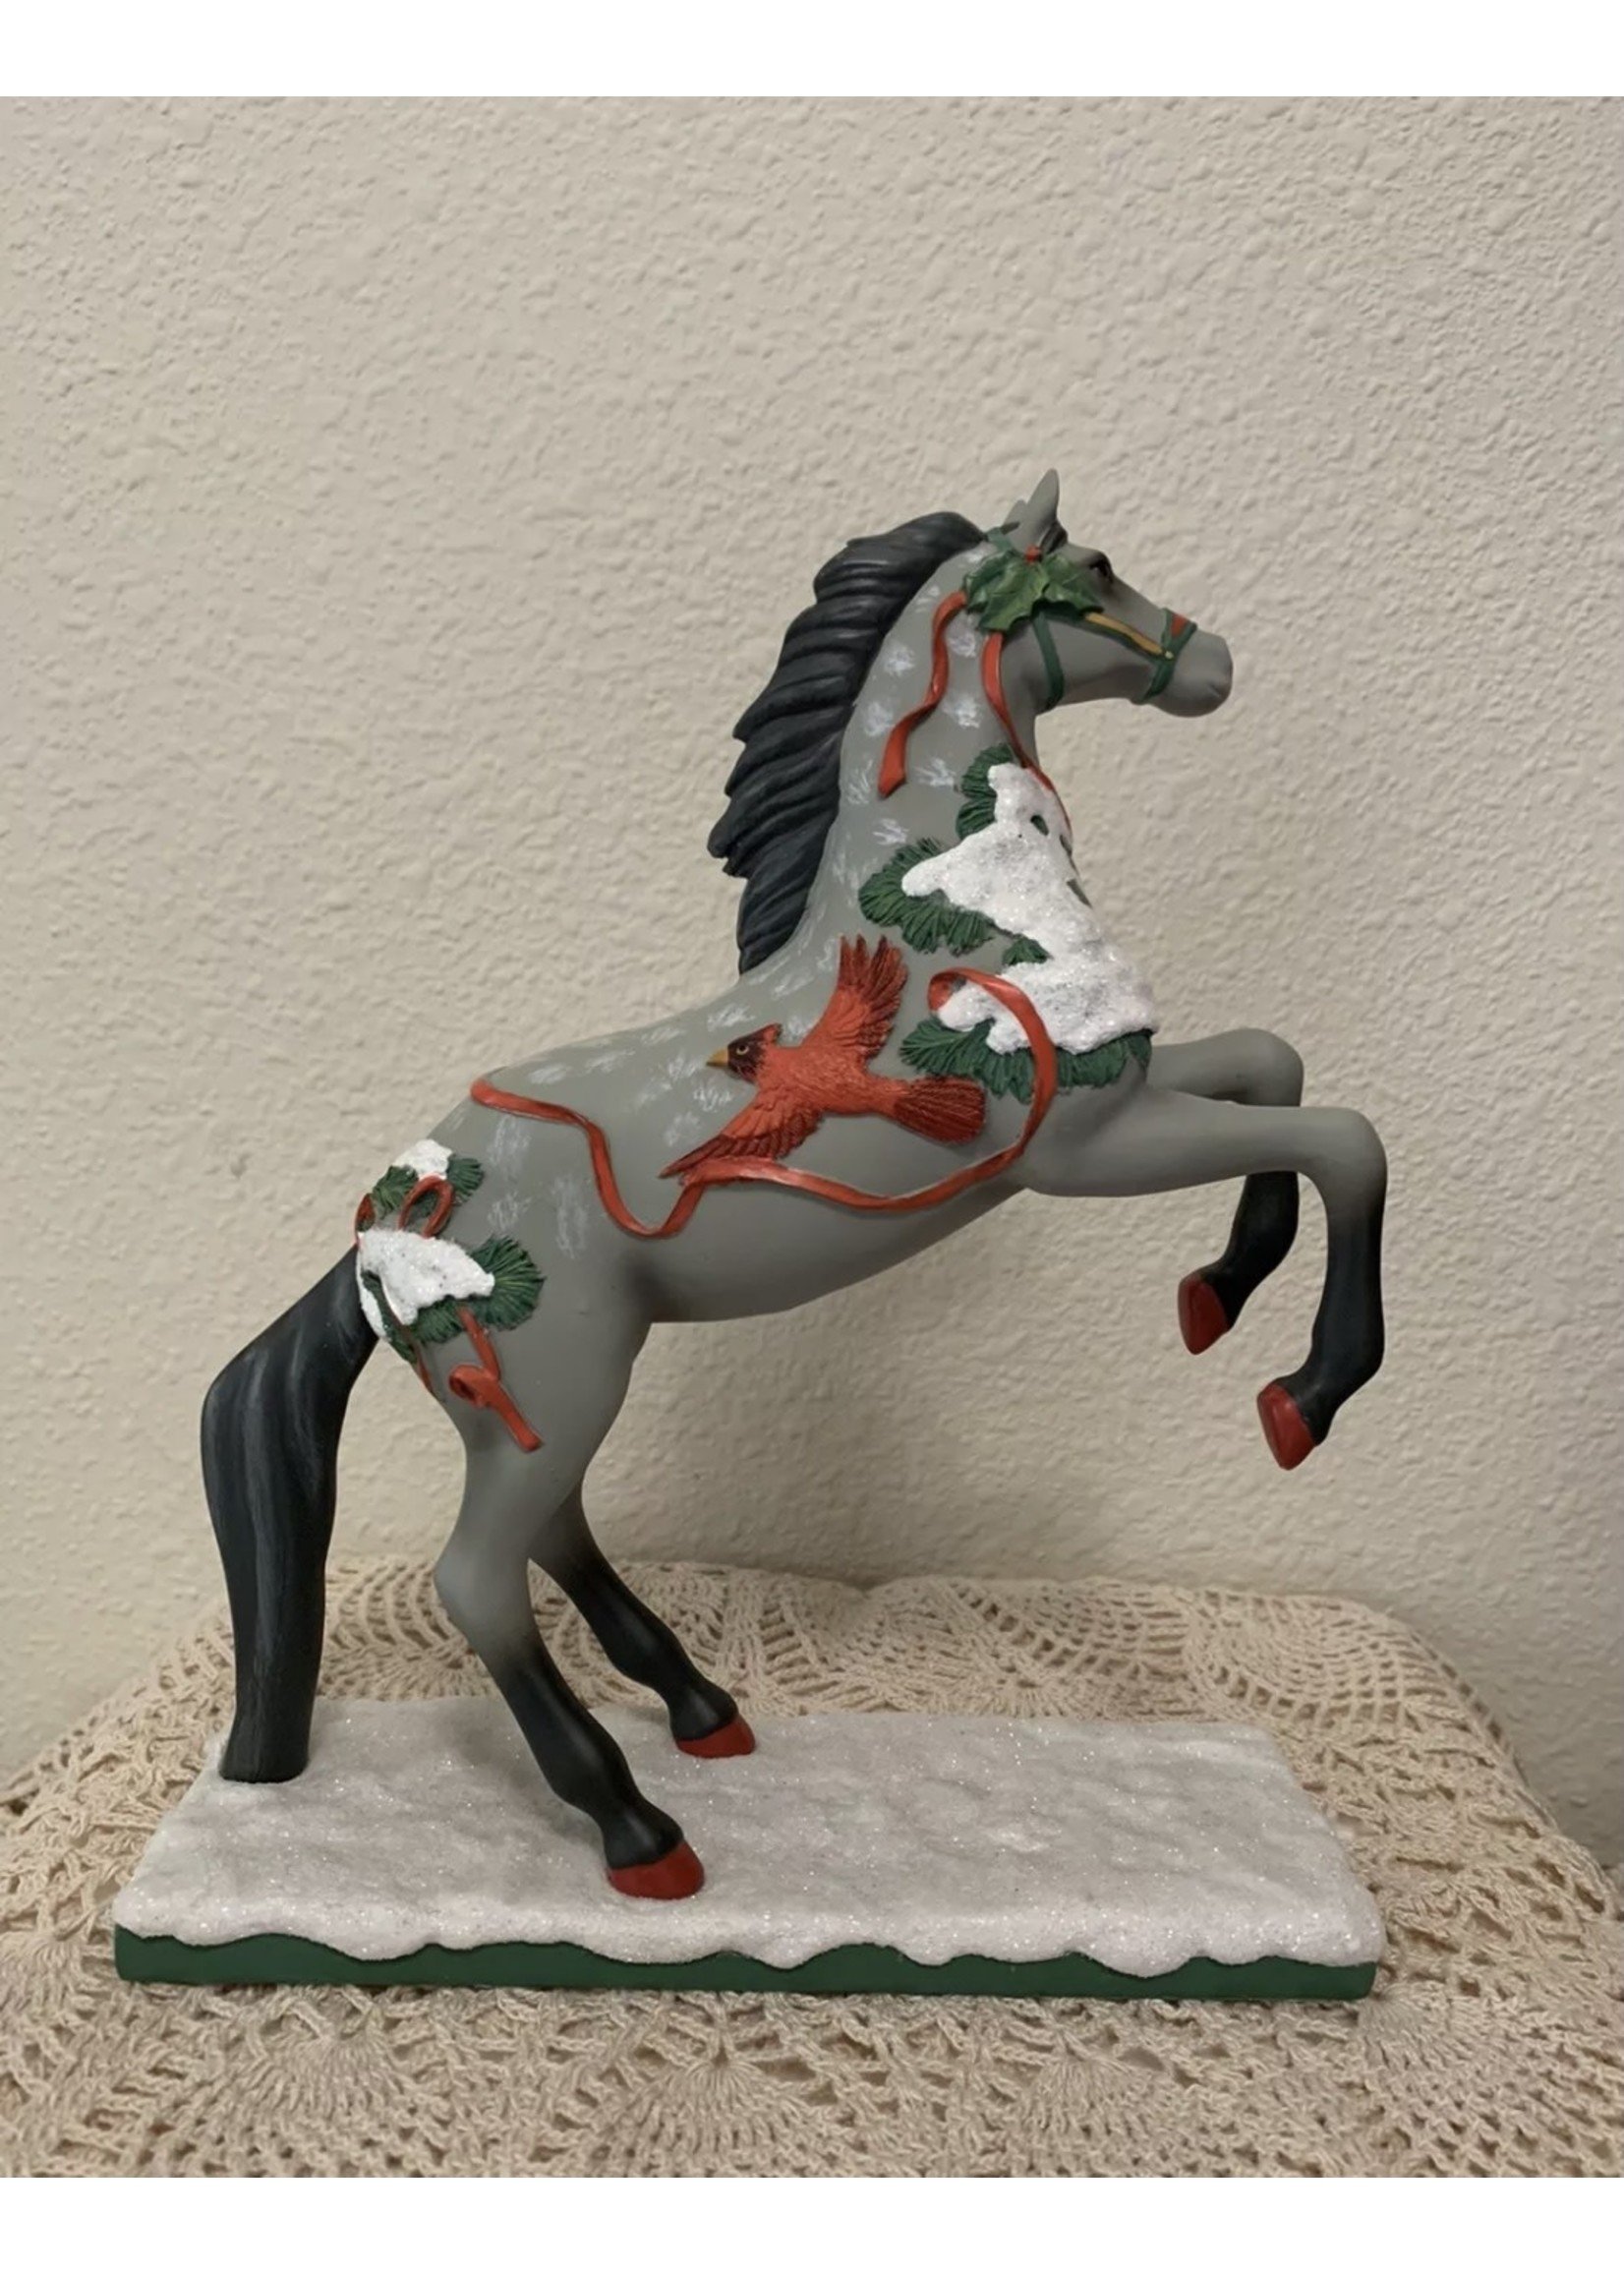 Trail of Painted Ponies TOPP 2016 Song of the Cardinal 4953771 1E 1378